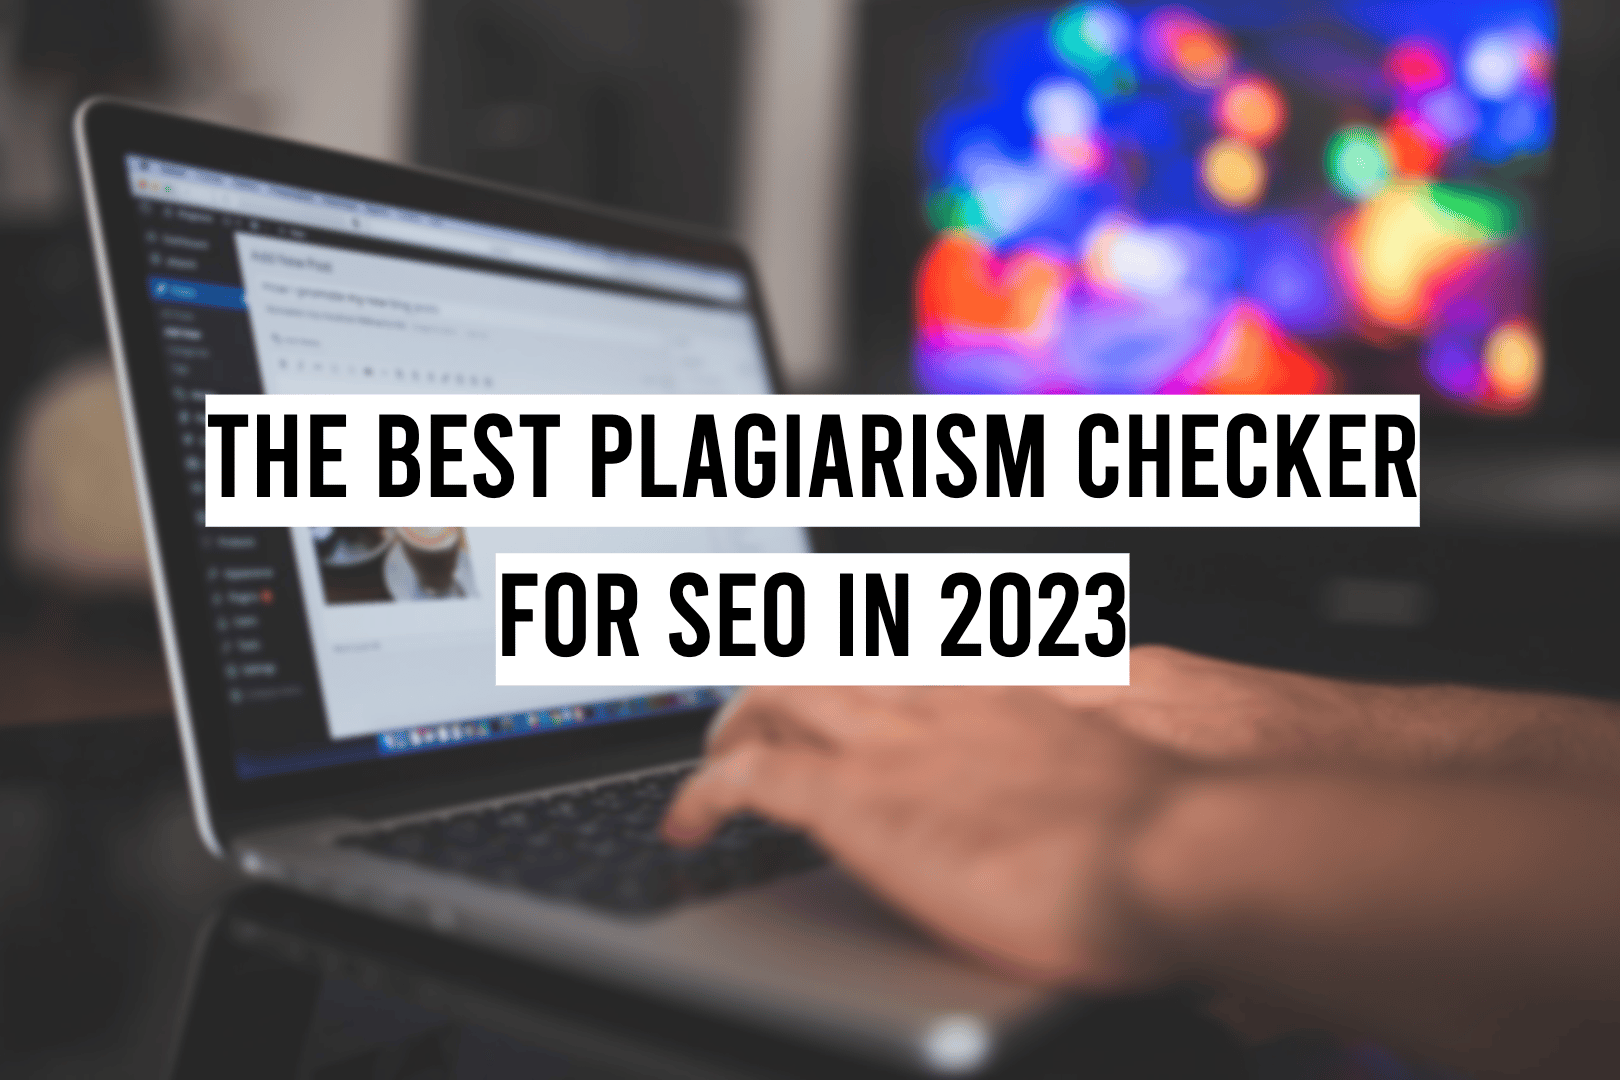 The Best Plagiarism Checker for SEO in